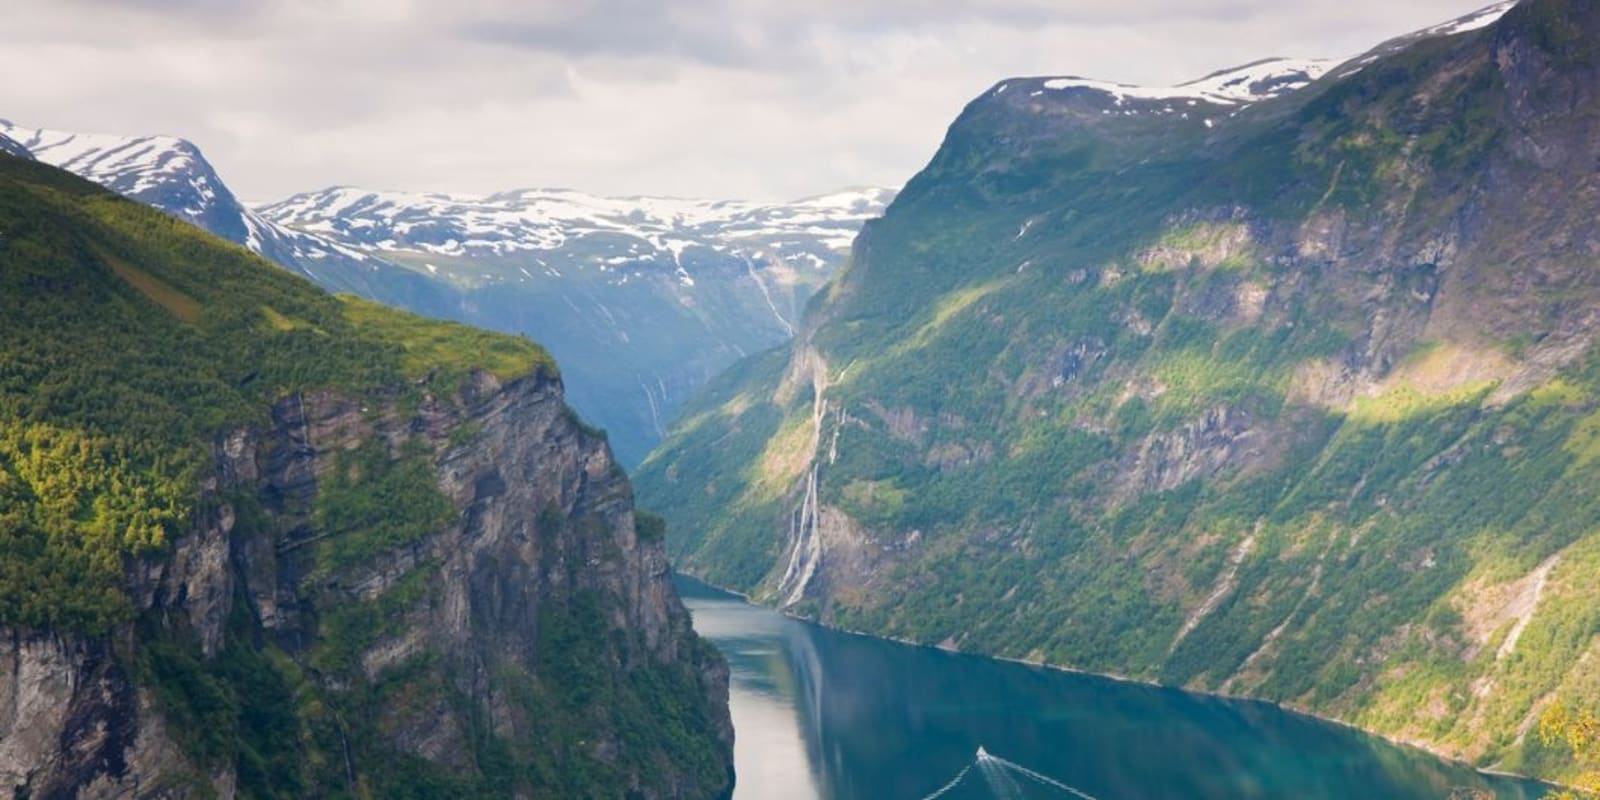 Expansive views of the fjords of Norway